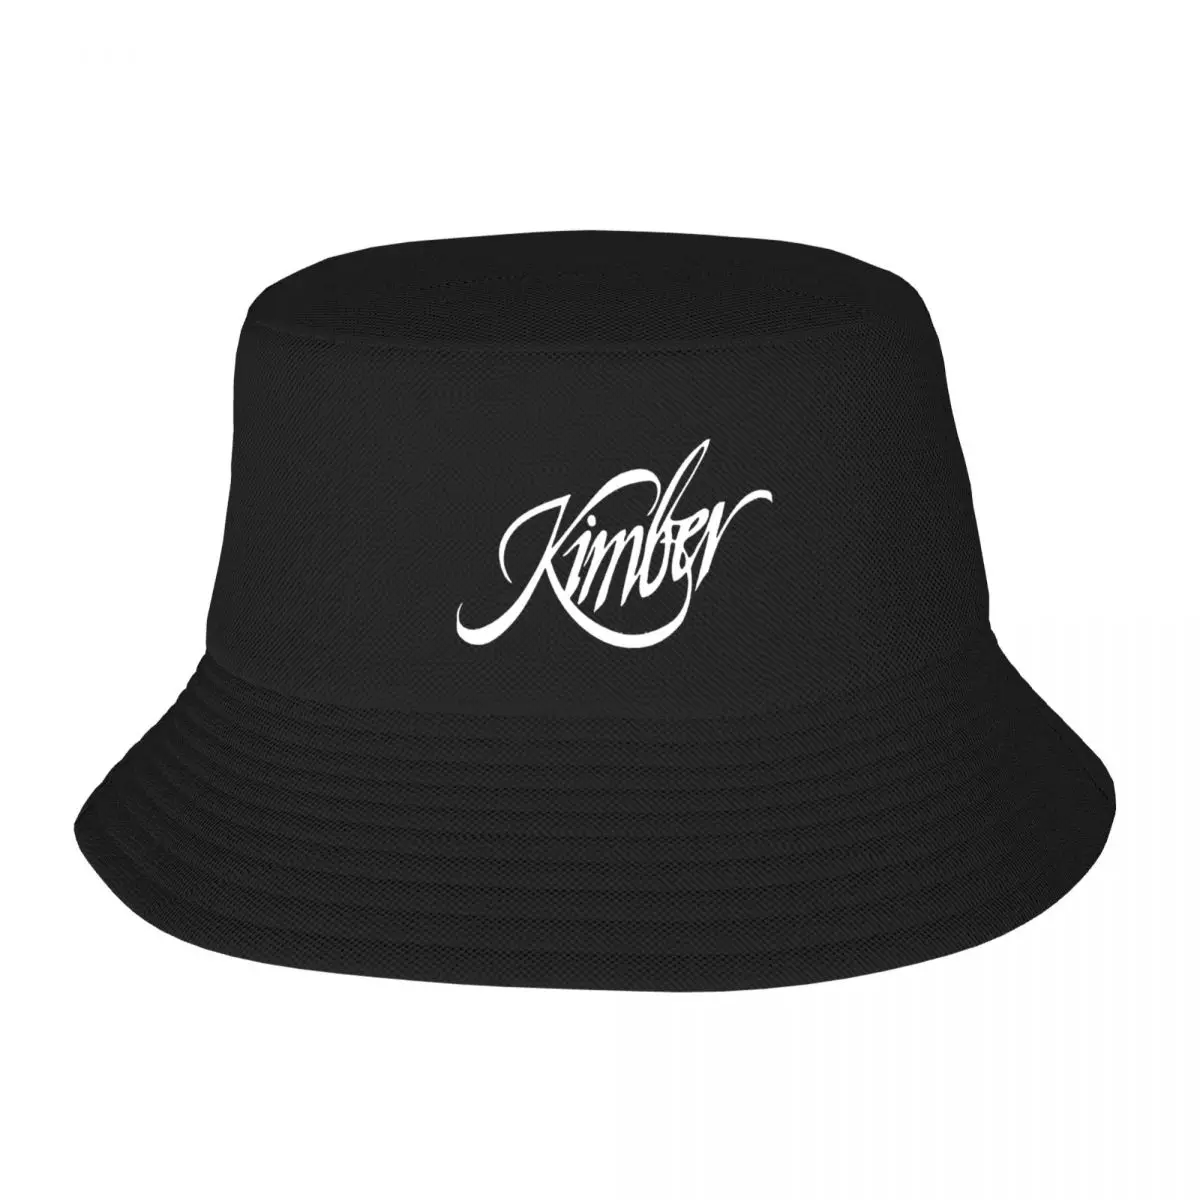 

Kimber Guns Firearms Fisherman's Hat, Adult Cap Fashionable Unisex For Daily Nice Gift